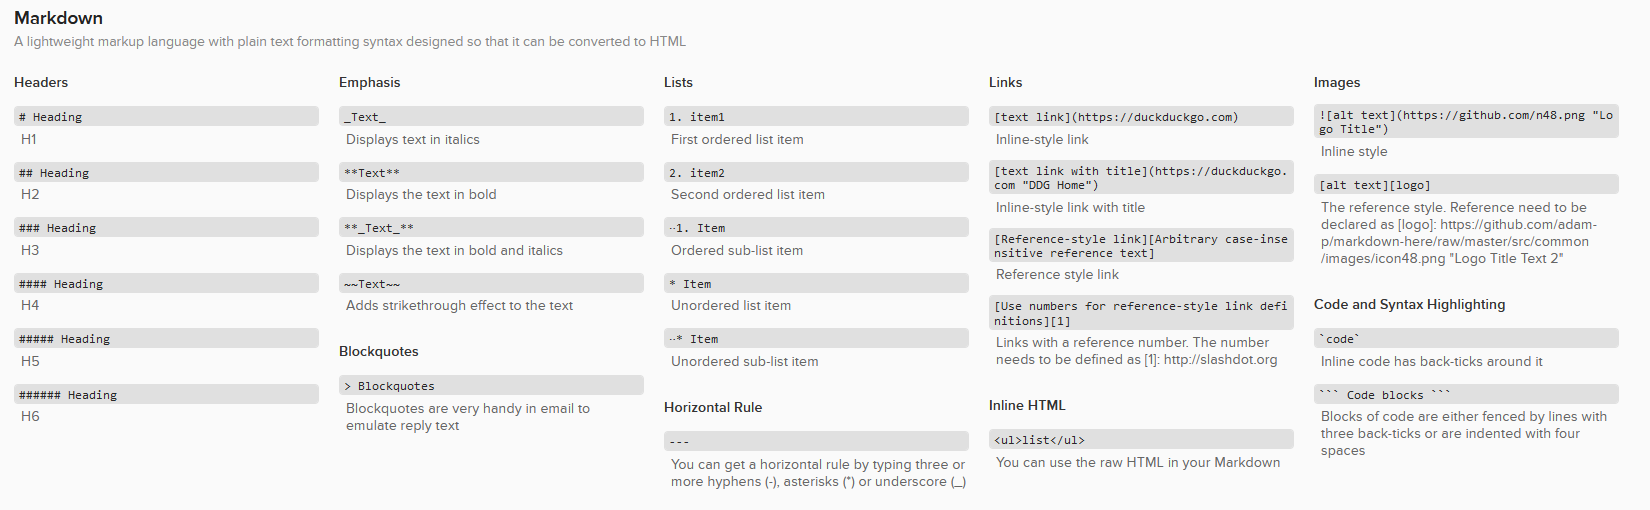 A quick user guide/cheatsheet for common use markdown syntax